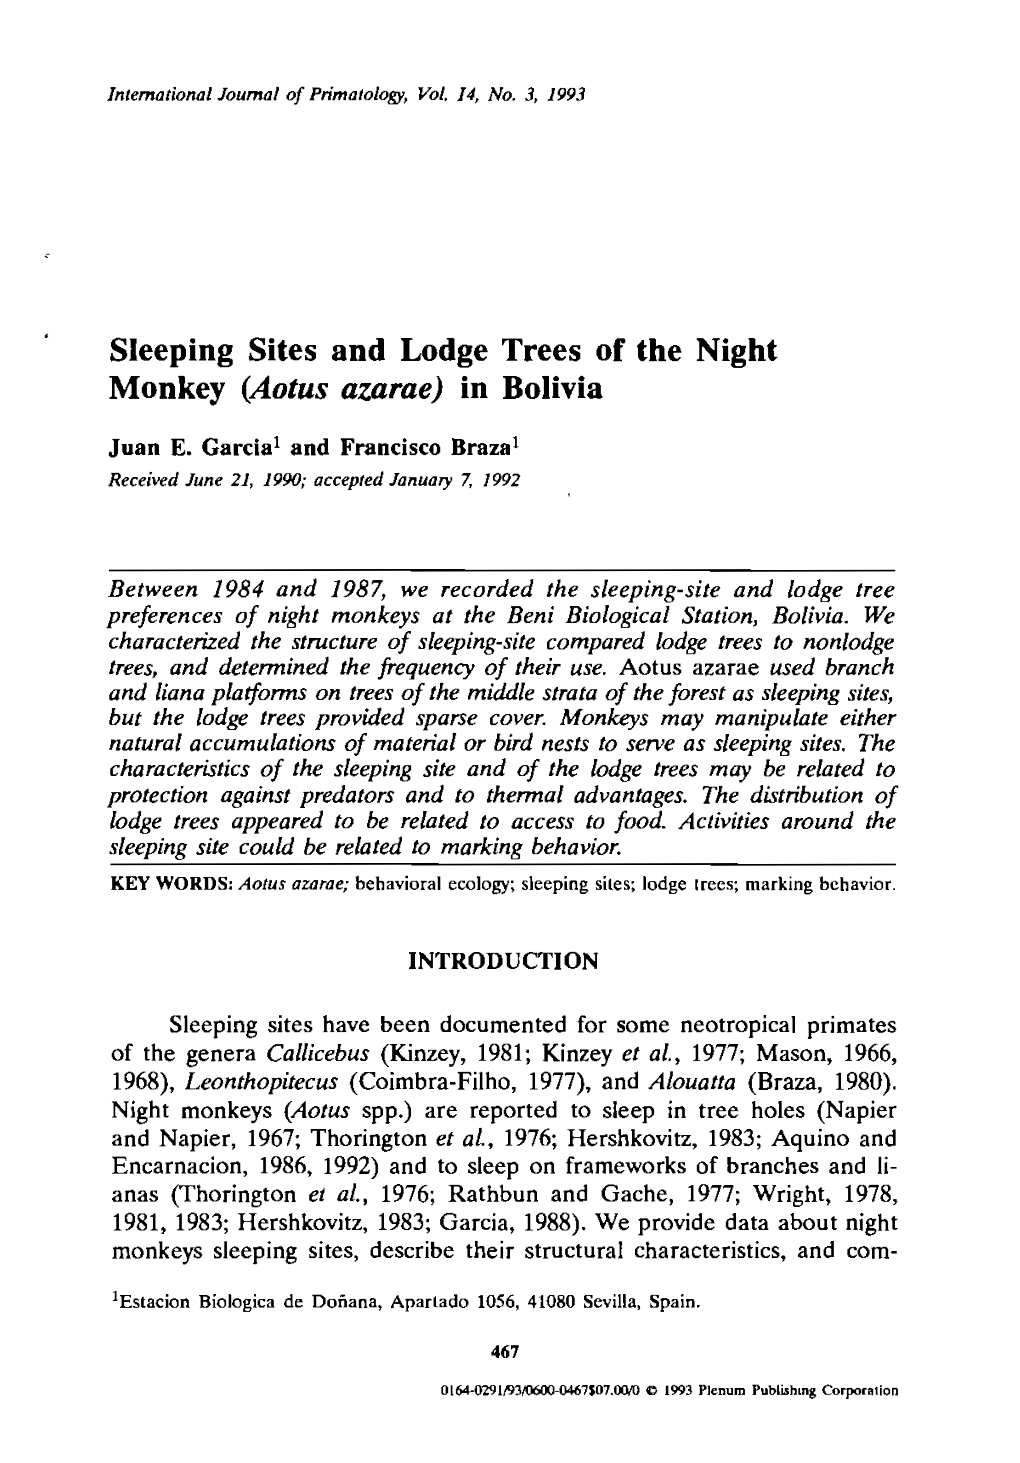 Sleeping Sites and Lodge Trees of the Night Monkey (Aotus Azarae) in Bolivia